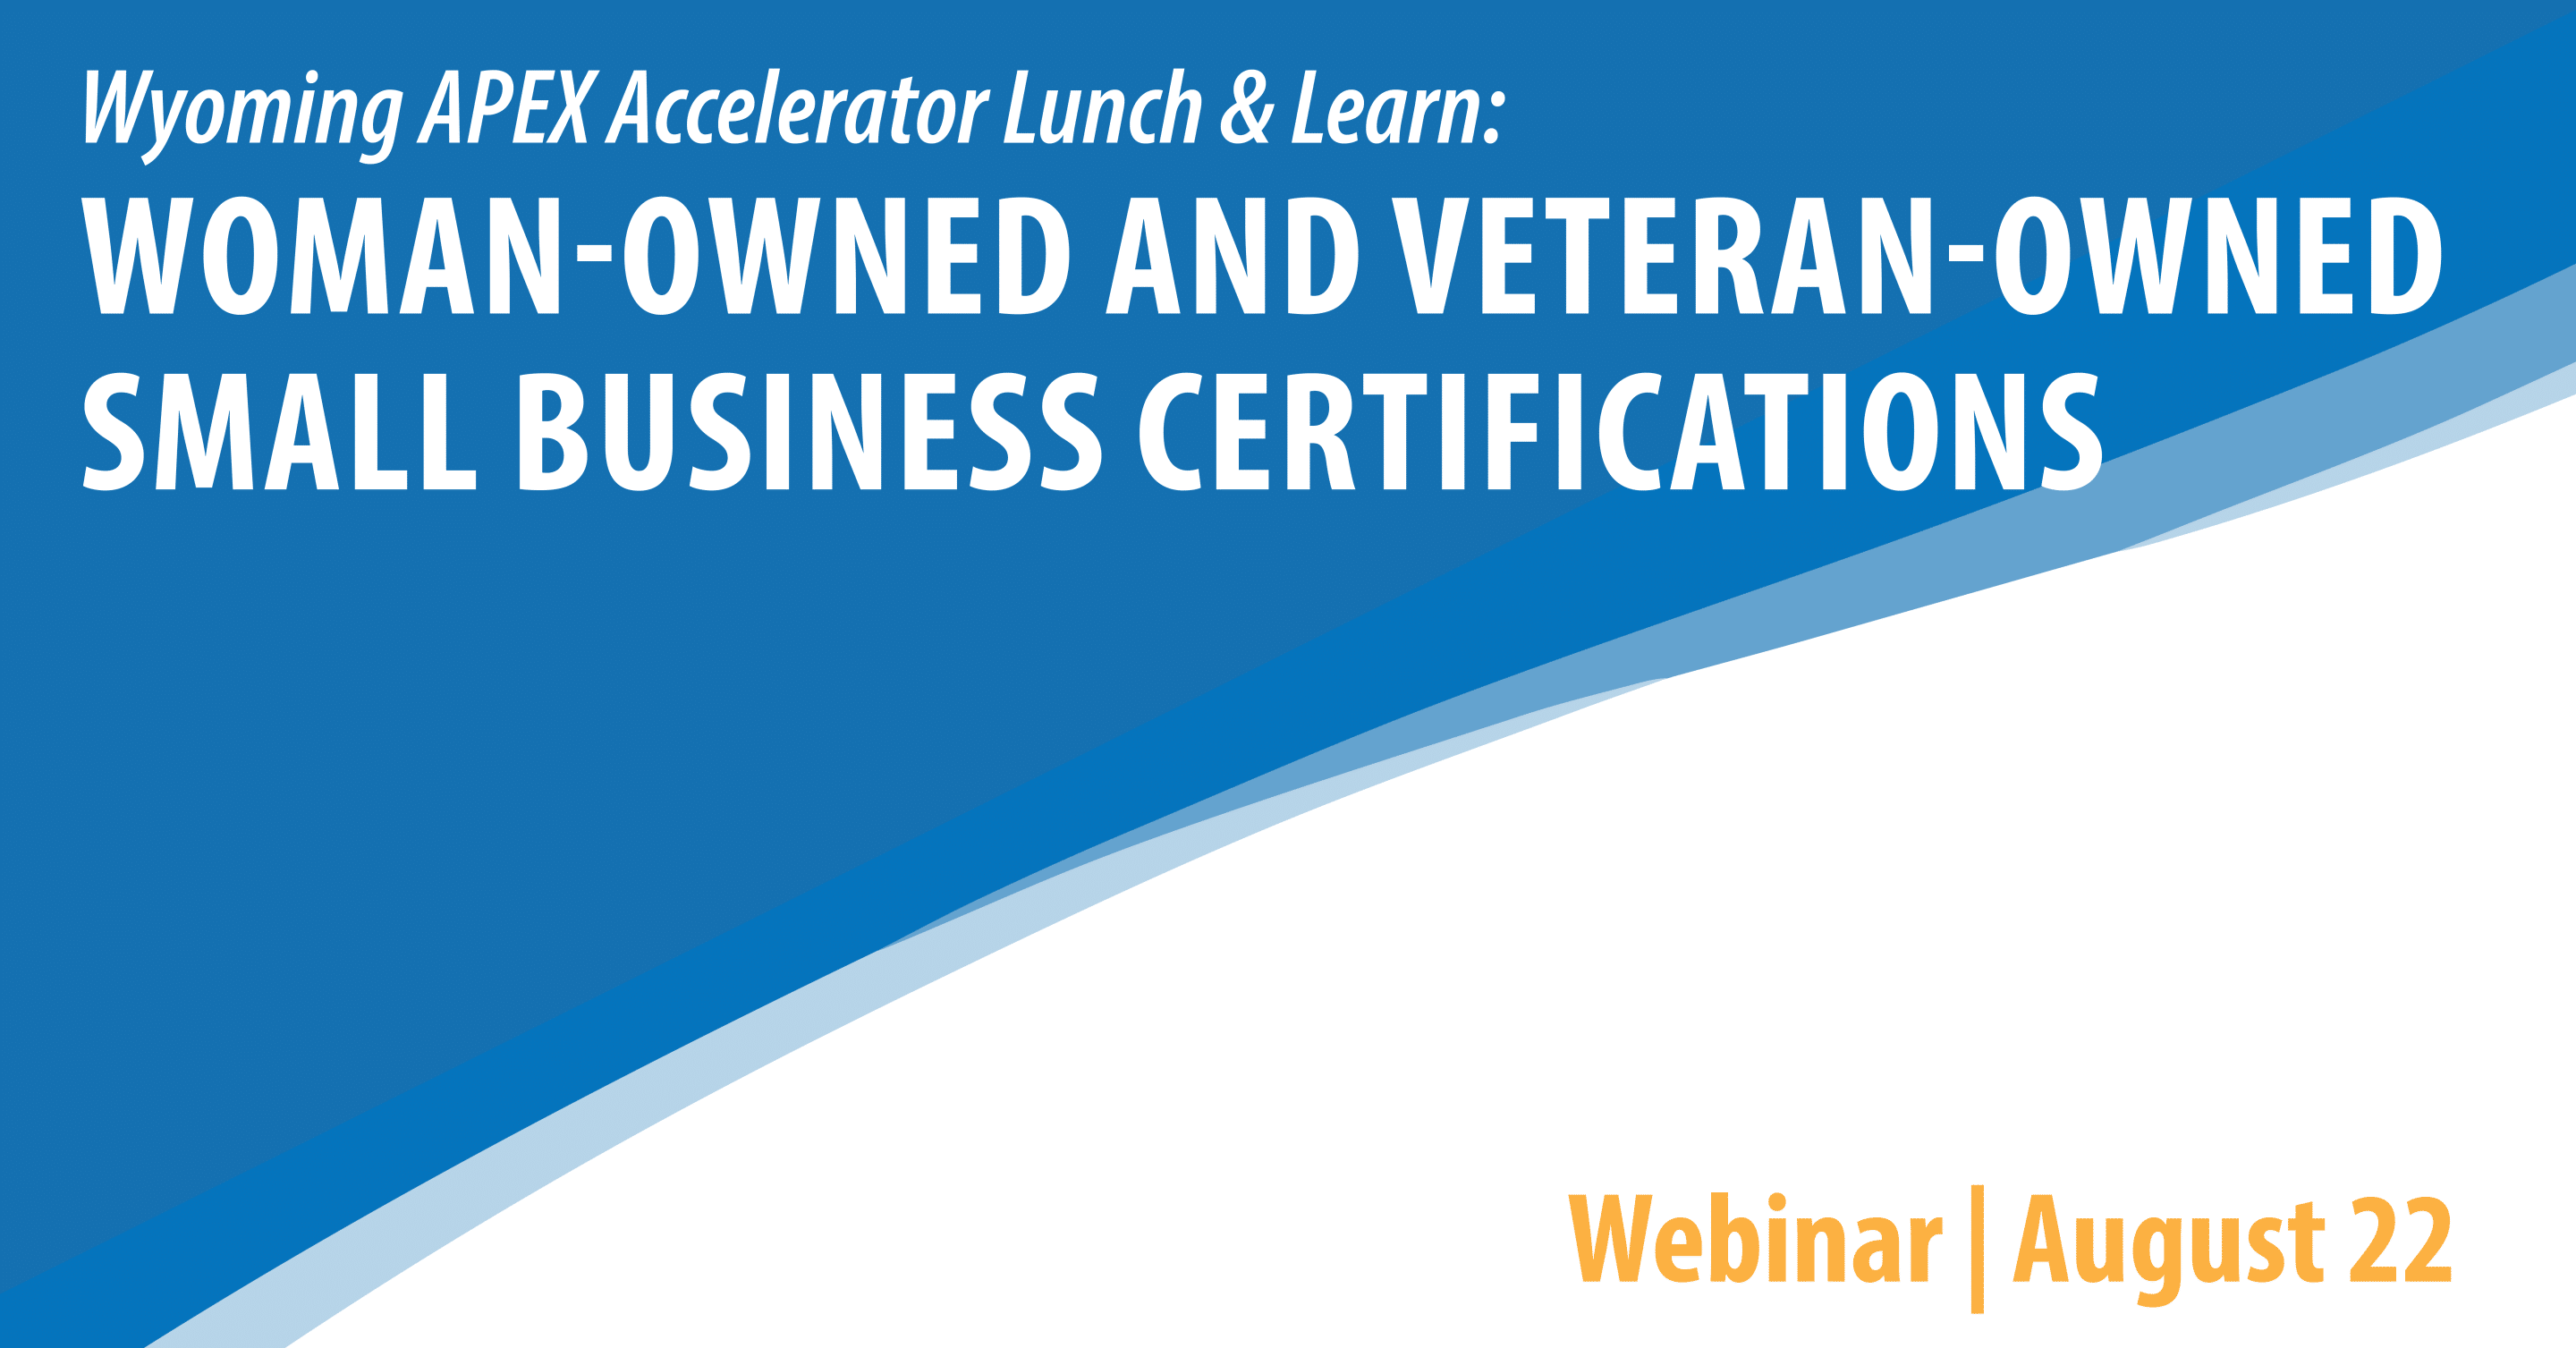 APEX Accelerator Lunch & Learn: Woman-Owned and Veteran-Owned Small Business Certifications